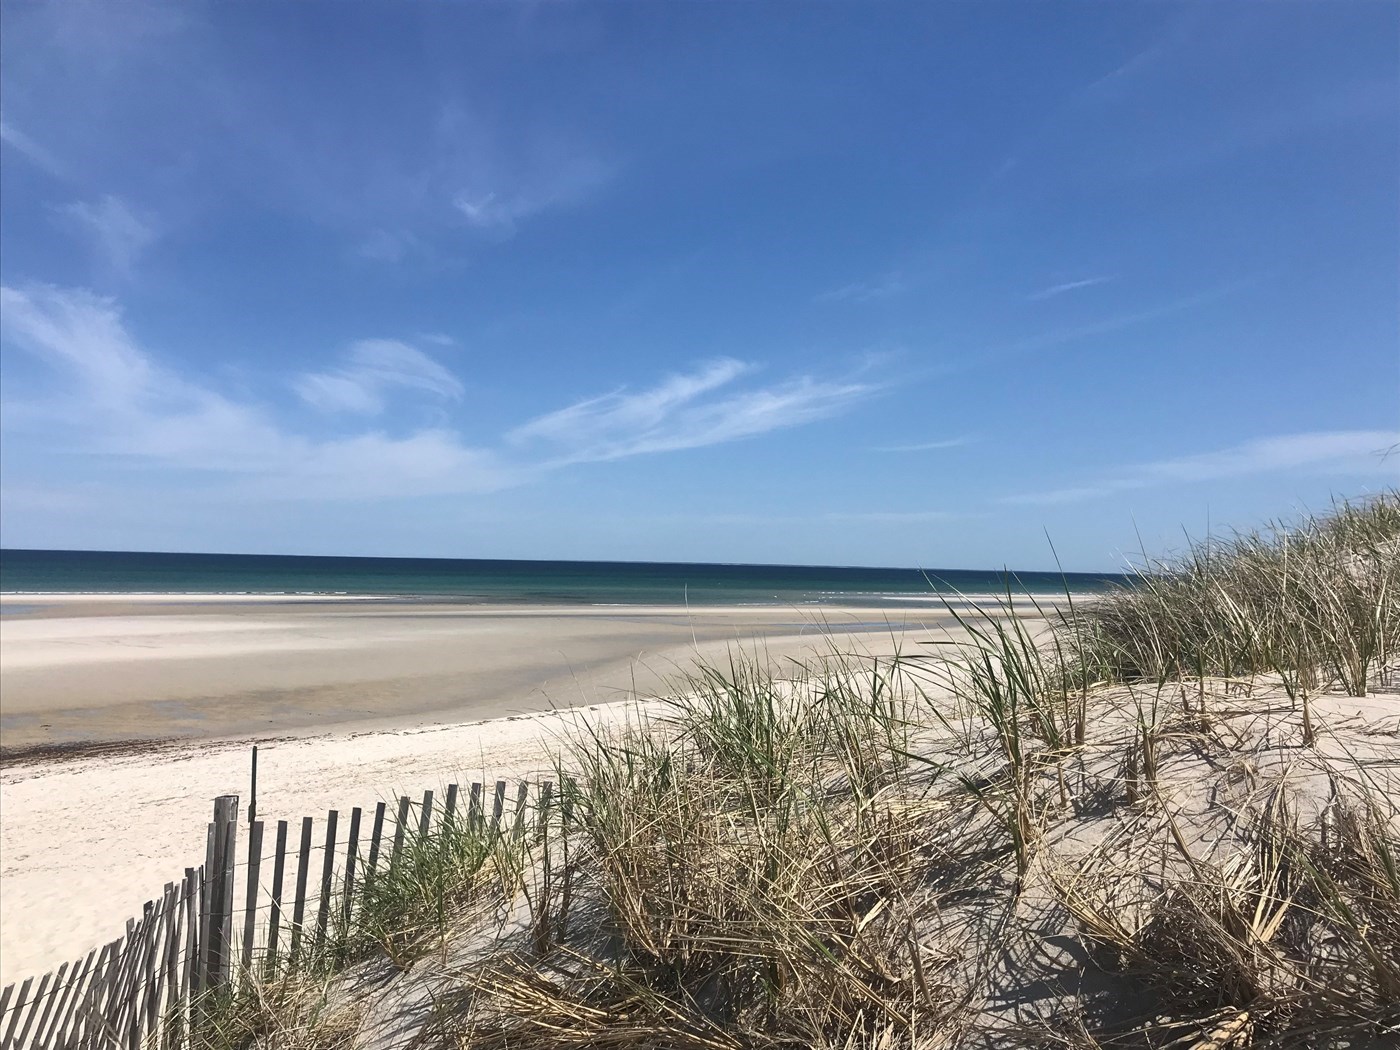 Looking to visit Mayflower Beach? Check out these local attractions and vacation rentals nearby!